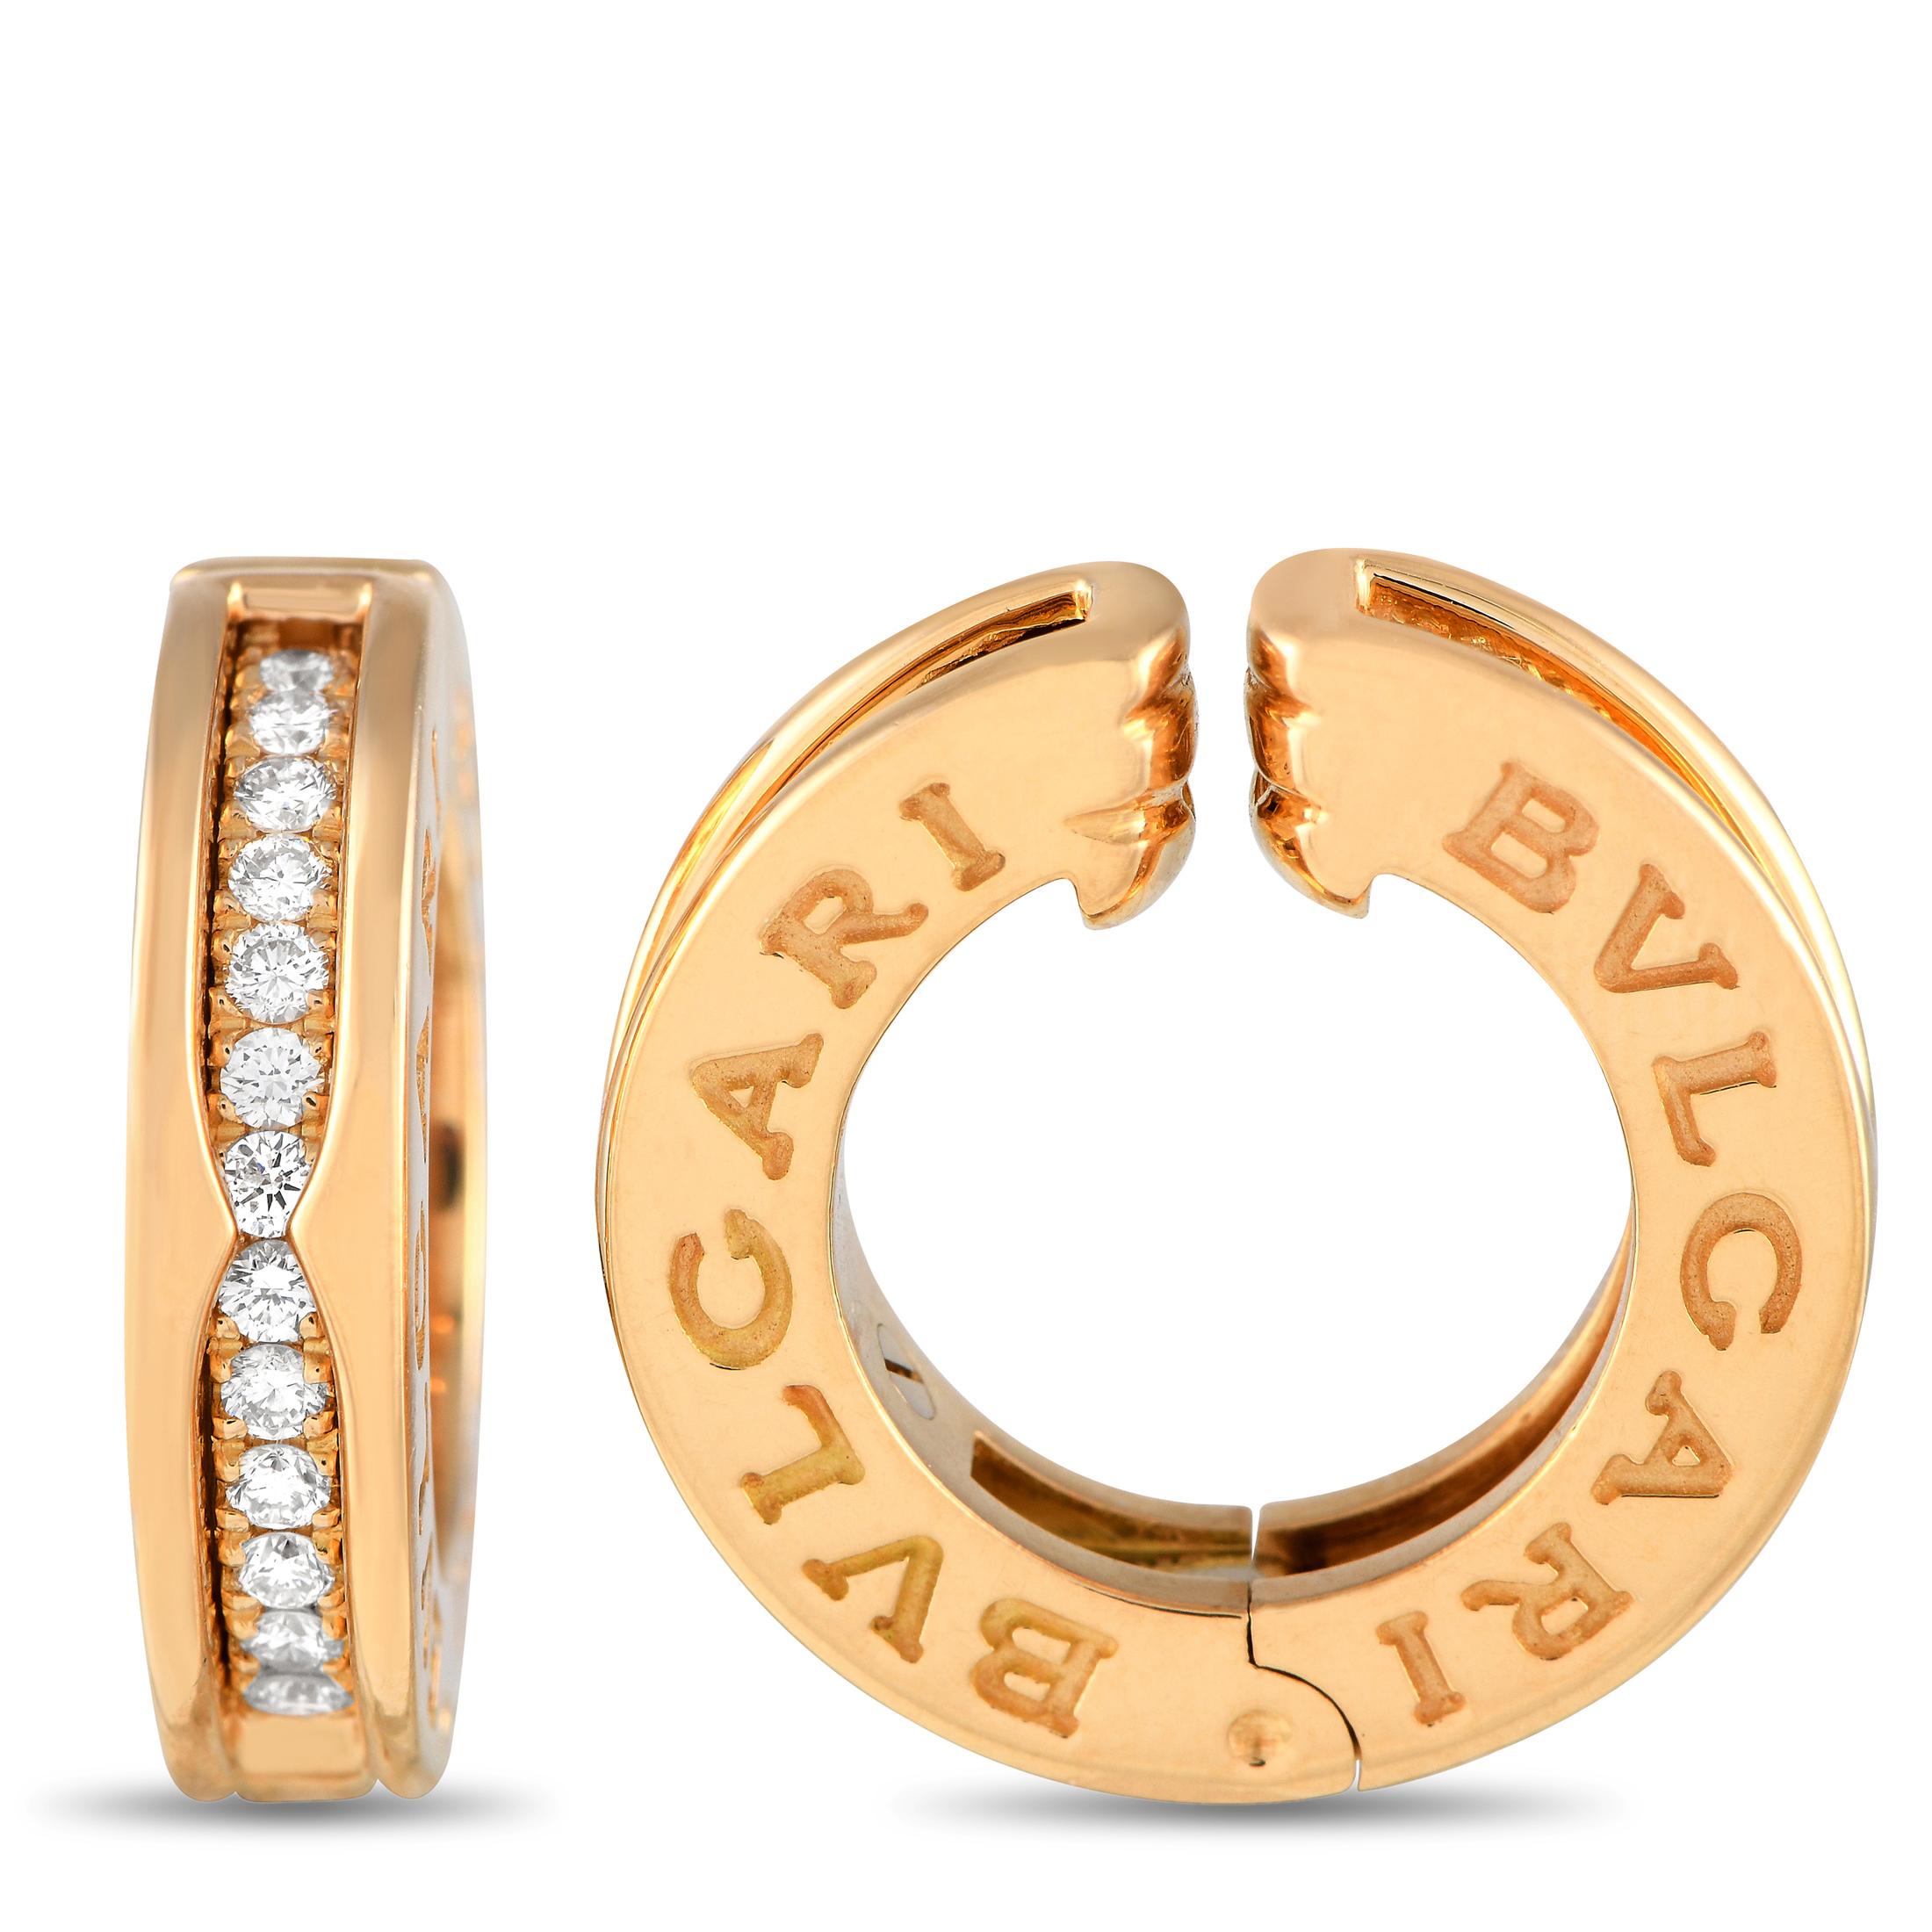 Taking inspiration from Rome's large ancient amphitheater, these Bvlgari B.zero1 hoop earrings beguile with their refined architectural beauty. The earrings feature a hinged closure, the double Bvlgari Bvlgari engraved logo, and round brilliant